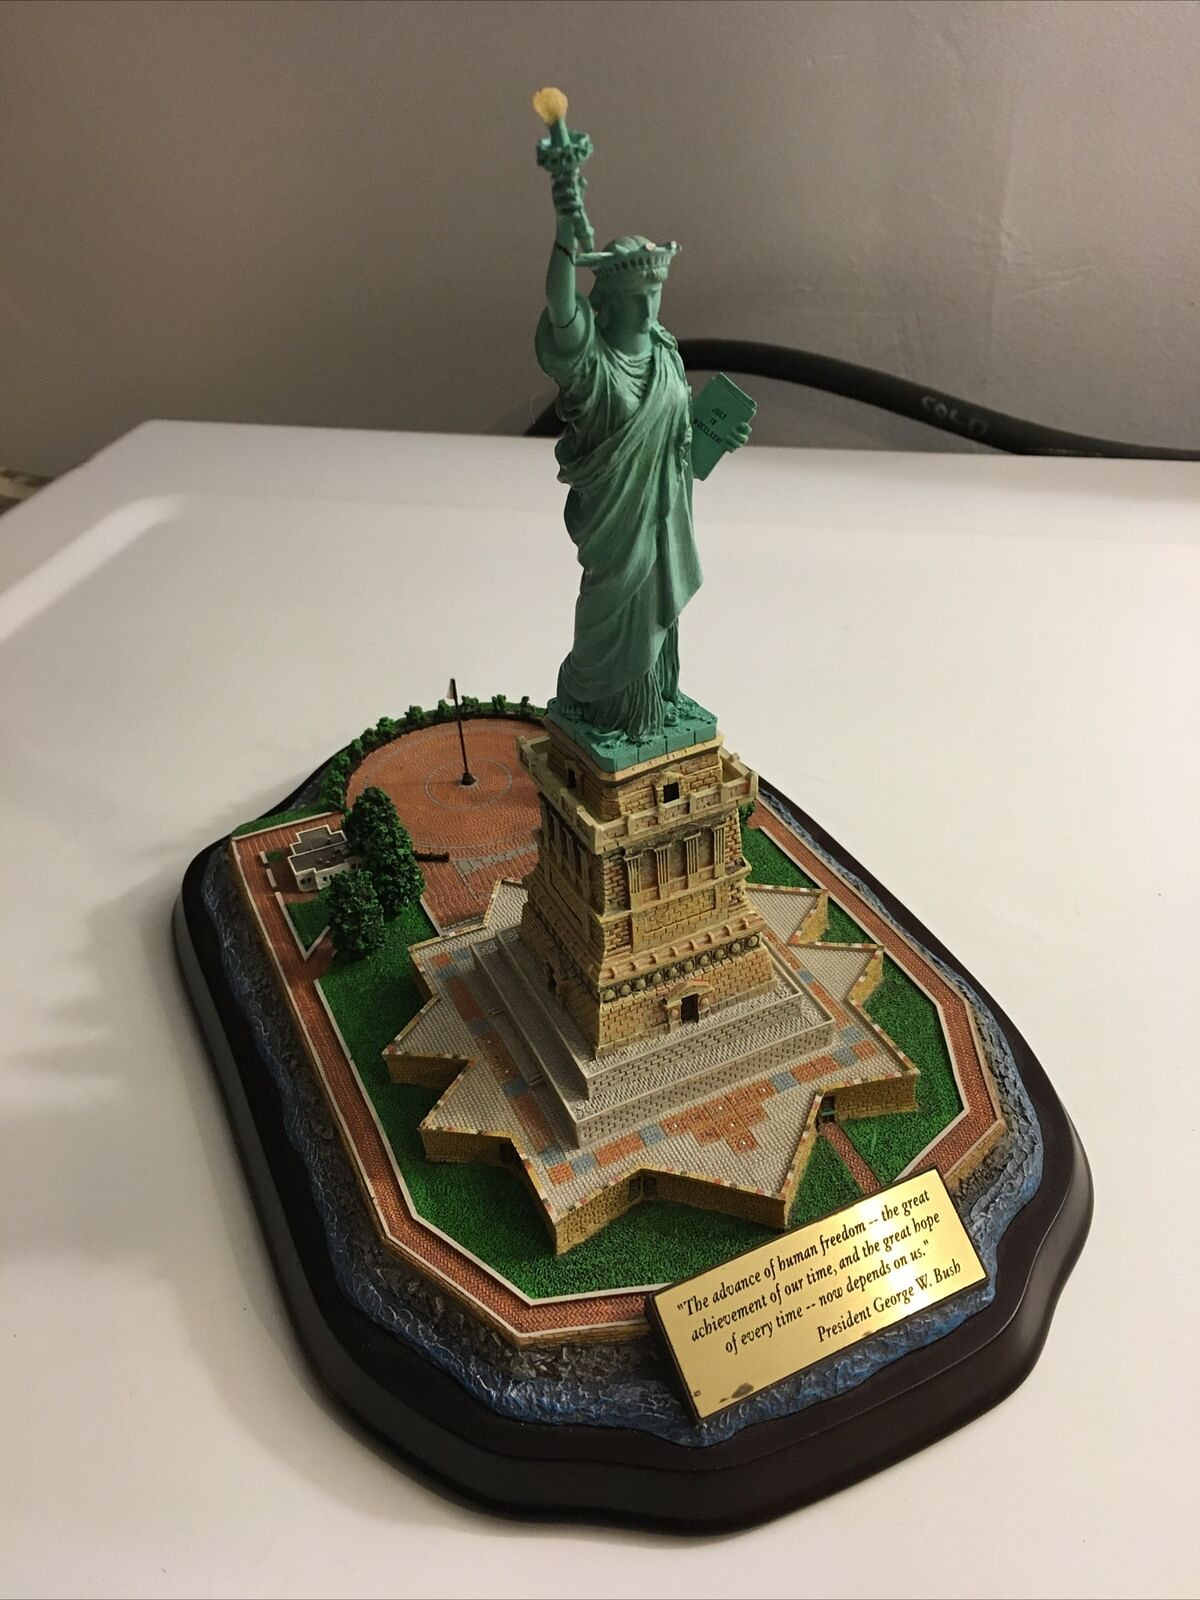 Danbury Mint Lighted Commemorative Statue of Liberty With American Flag